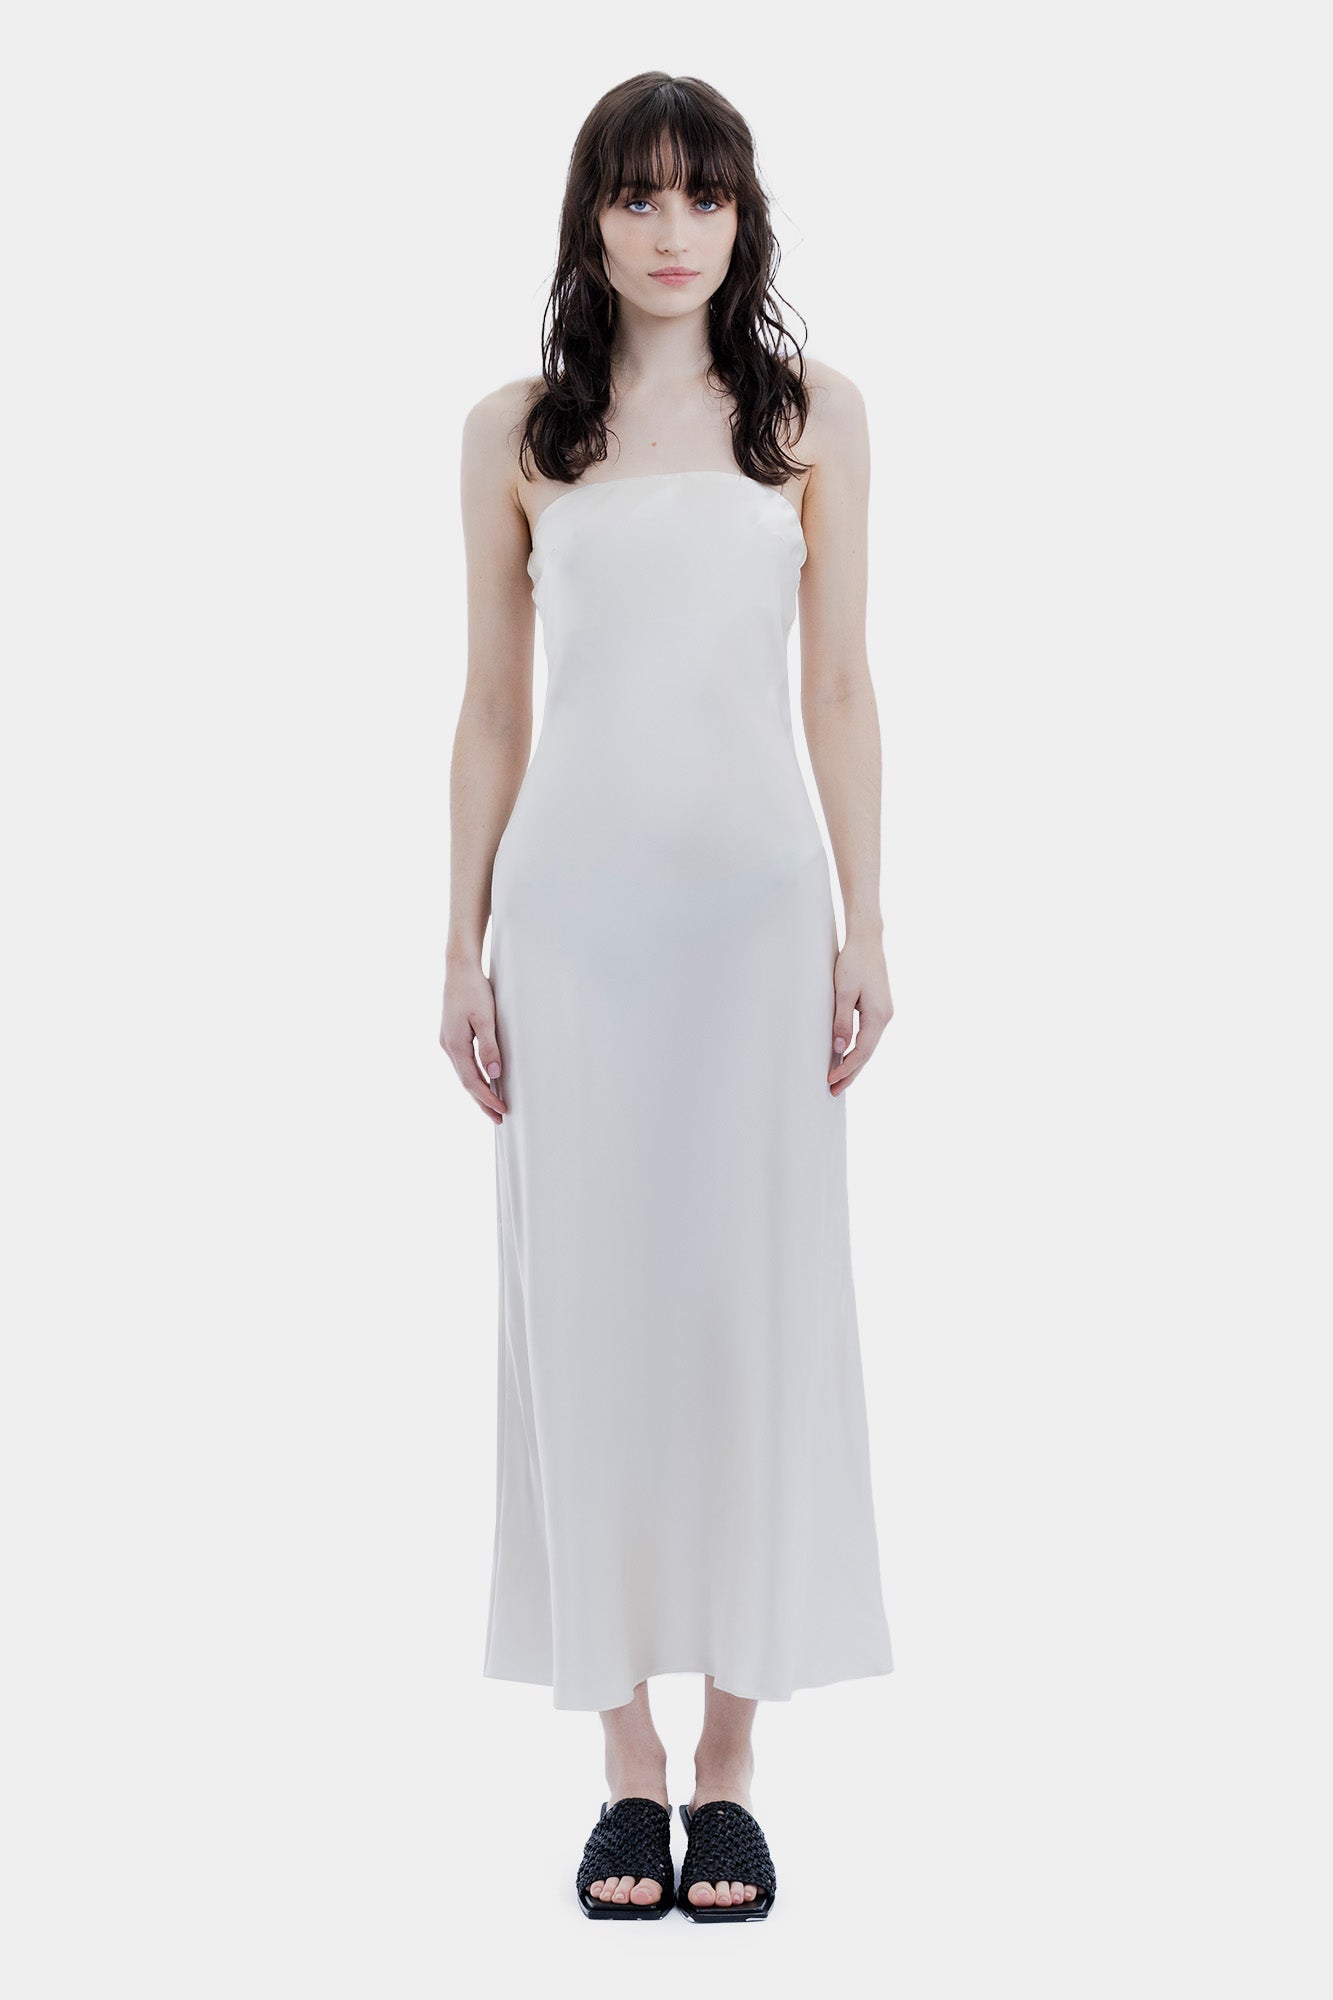 The Strapless Bias Midi Dress By GINIA In Buttercream